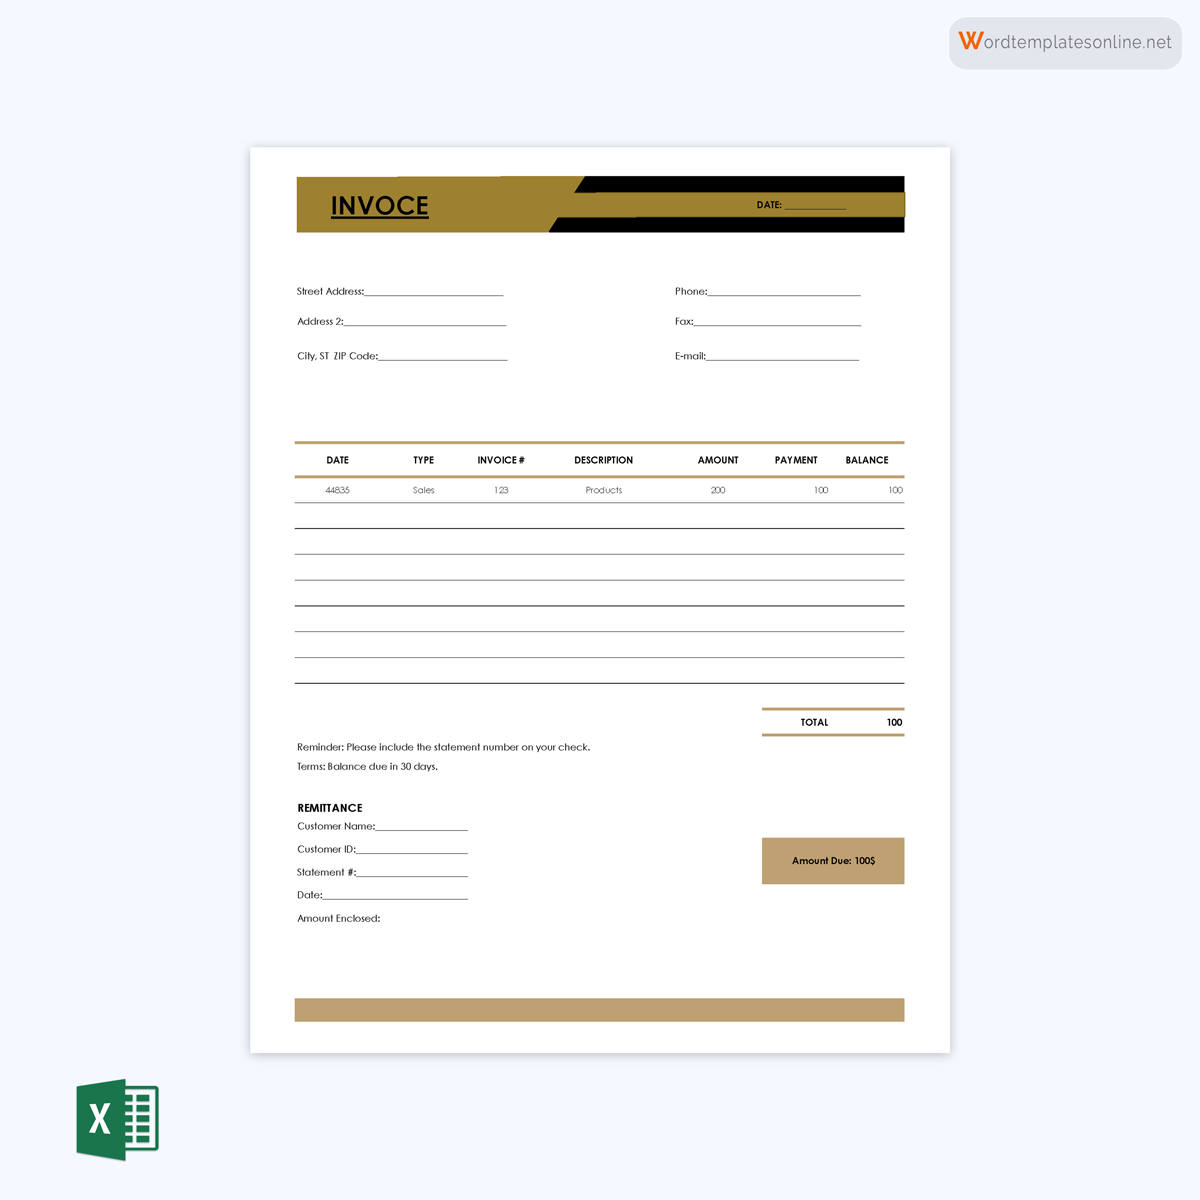 Printable invoice template example for professional use